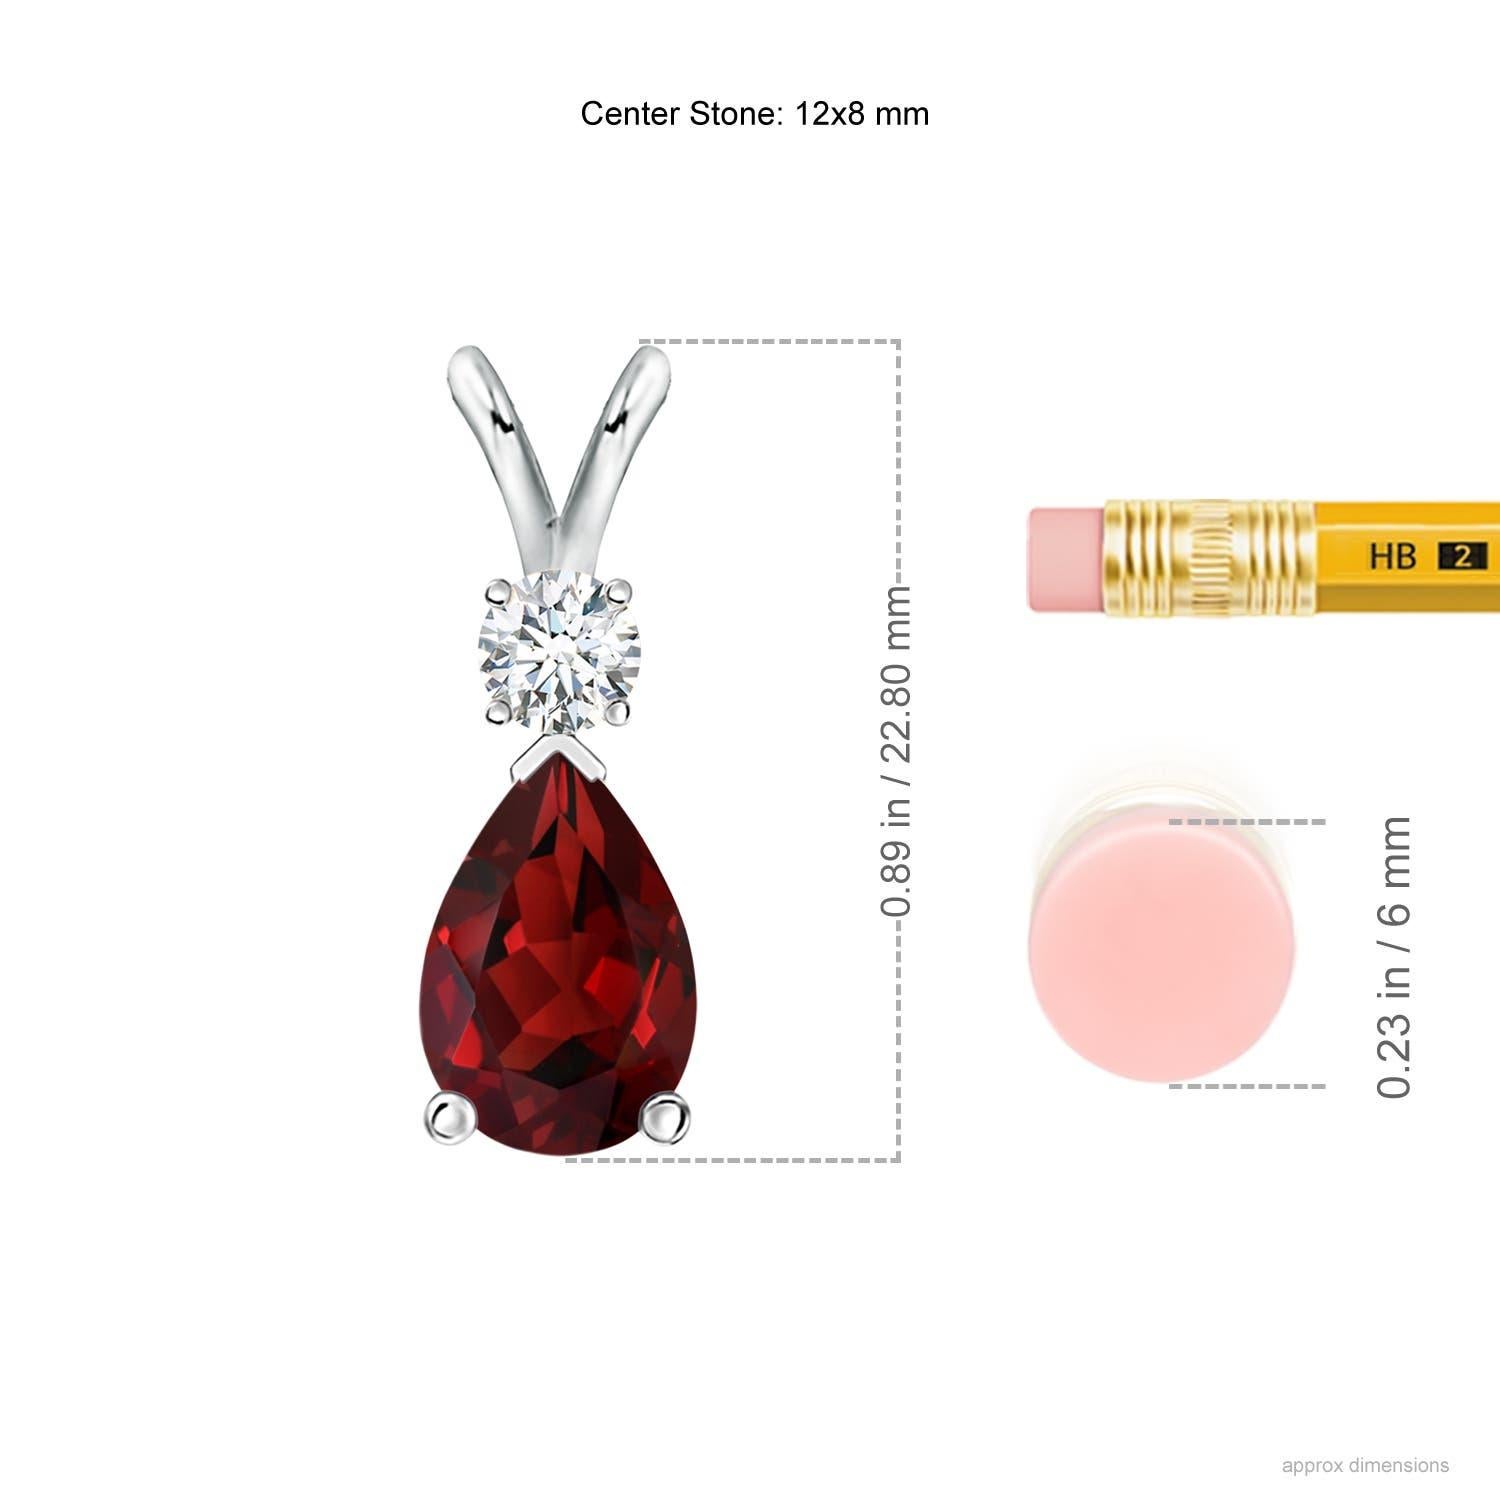 A pear-shaped intense red garnet is secured in a prong setting and embellished with a diamond accent on the top. Simple yet stunning, this teardrop garnet pendant with V bale is sculpted in 14k white gold.